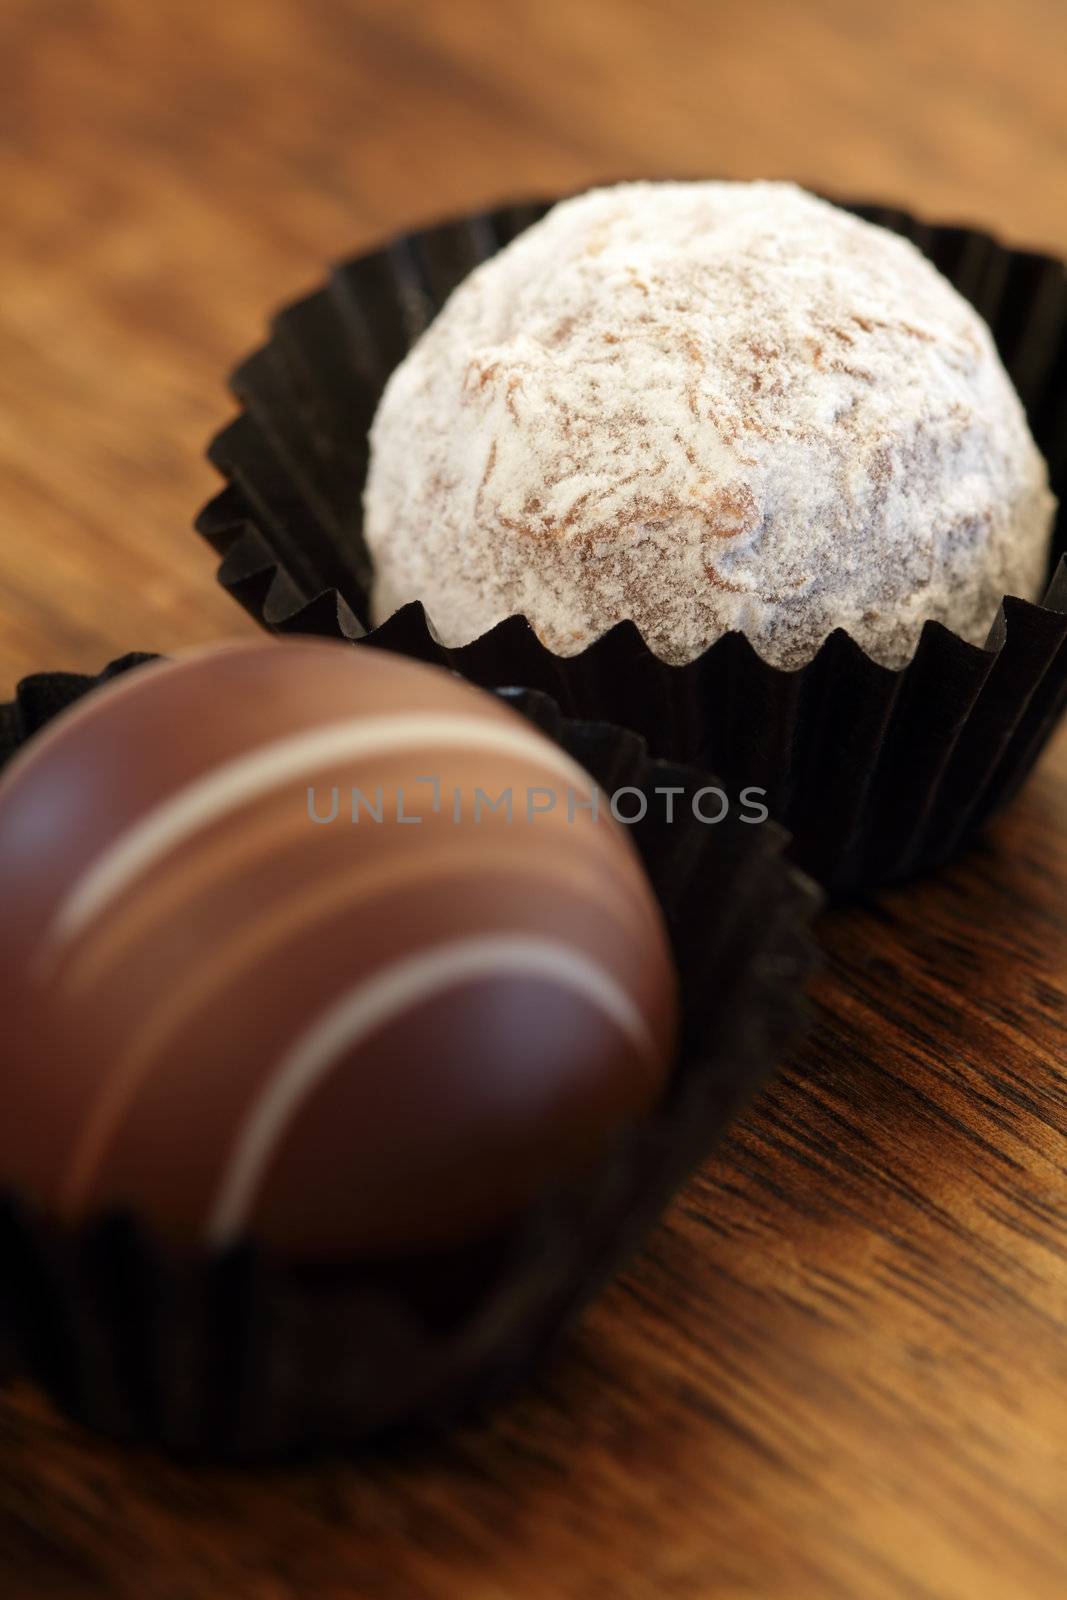 Photo of two chocolate truffles in paper wrappers.  Very Shallow depth of field, focusing on white truffle.